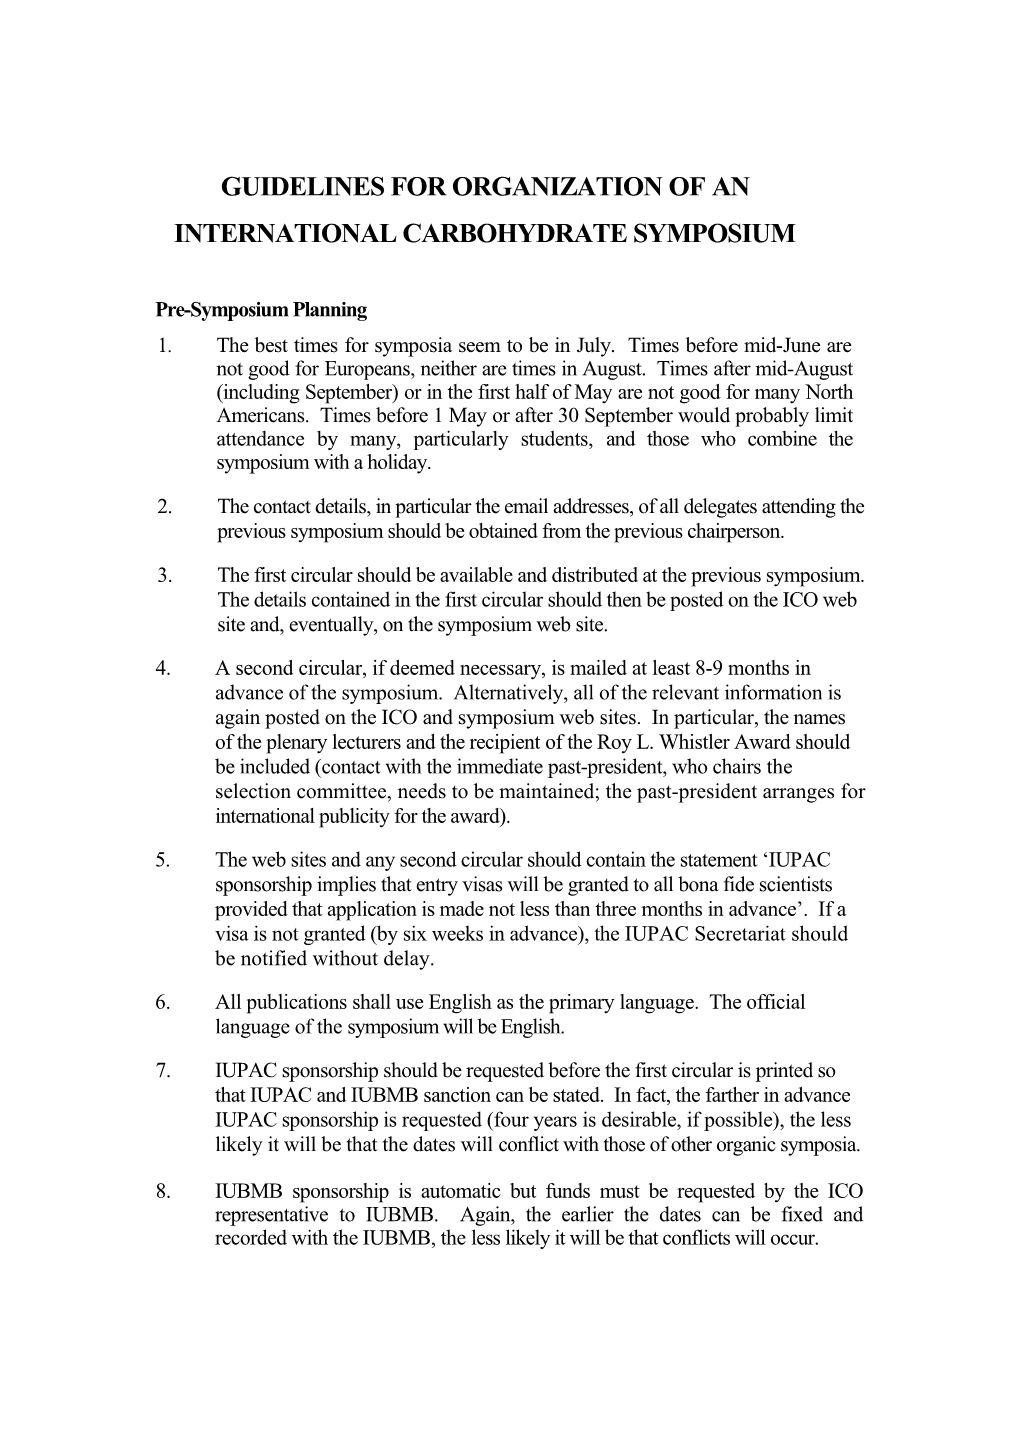 Guidelines for Organization of an International Carbohydrate Symposium